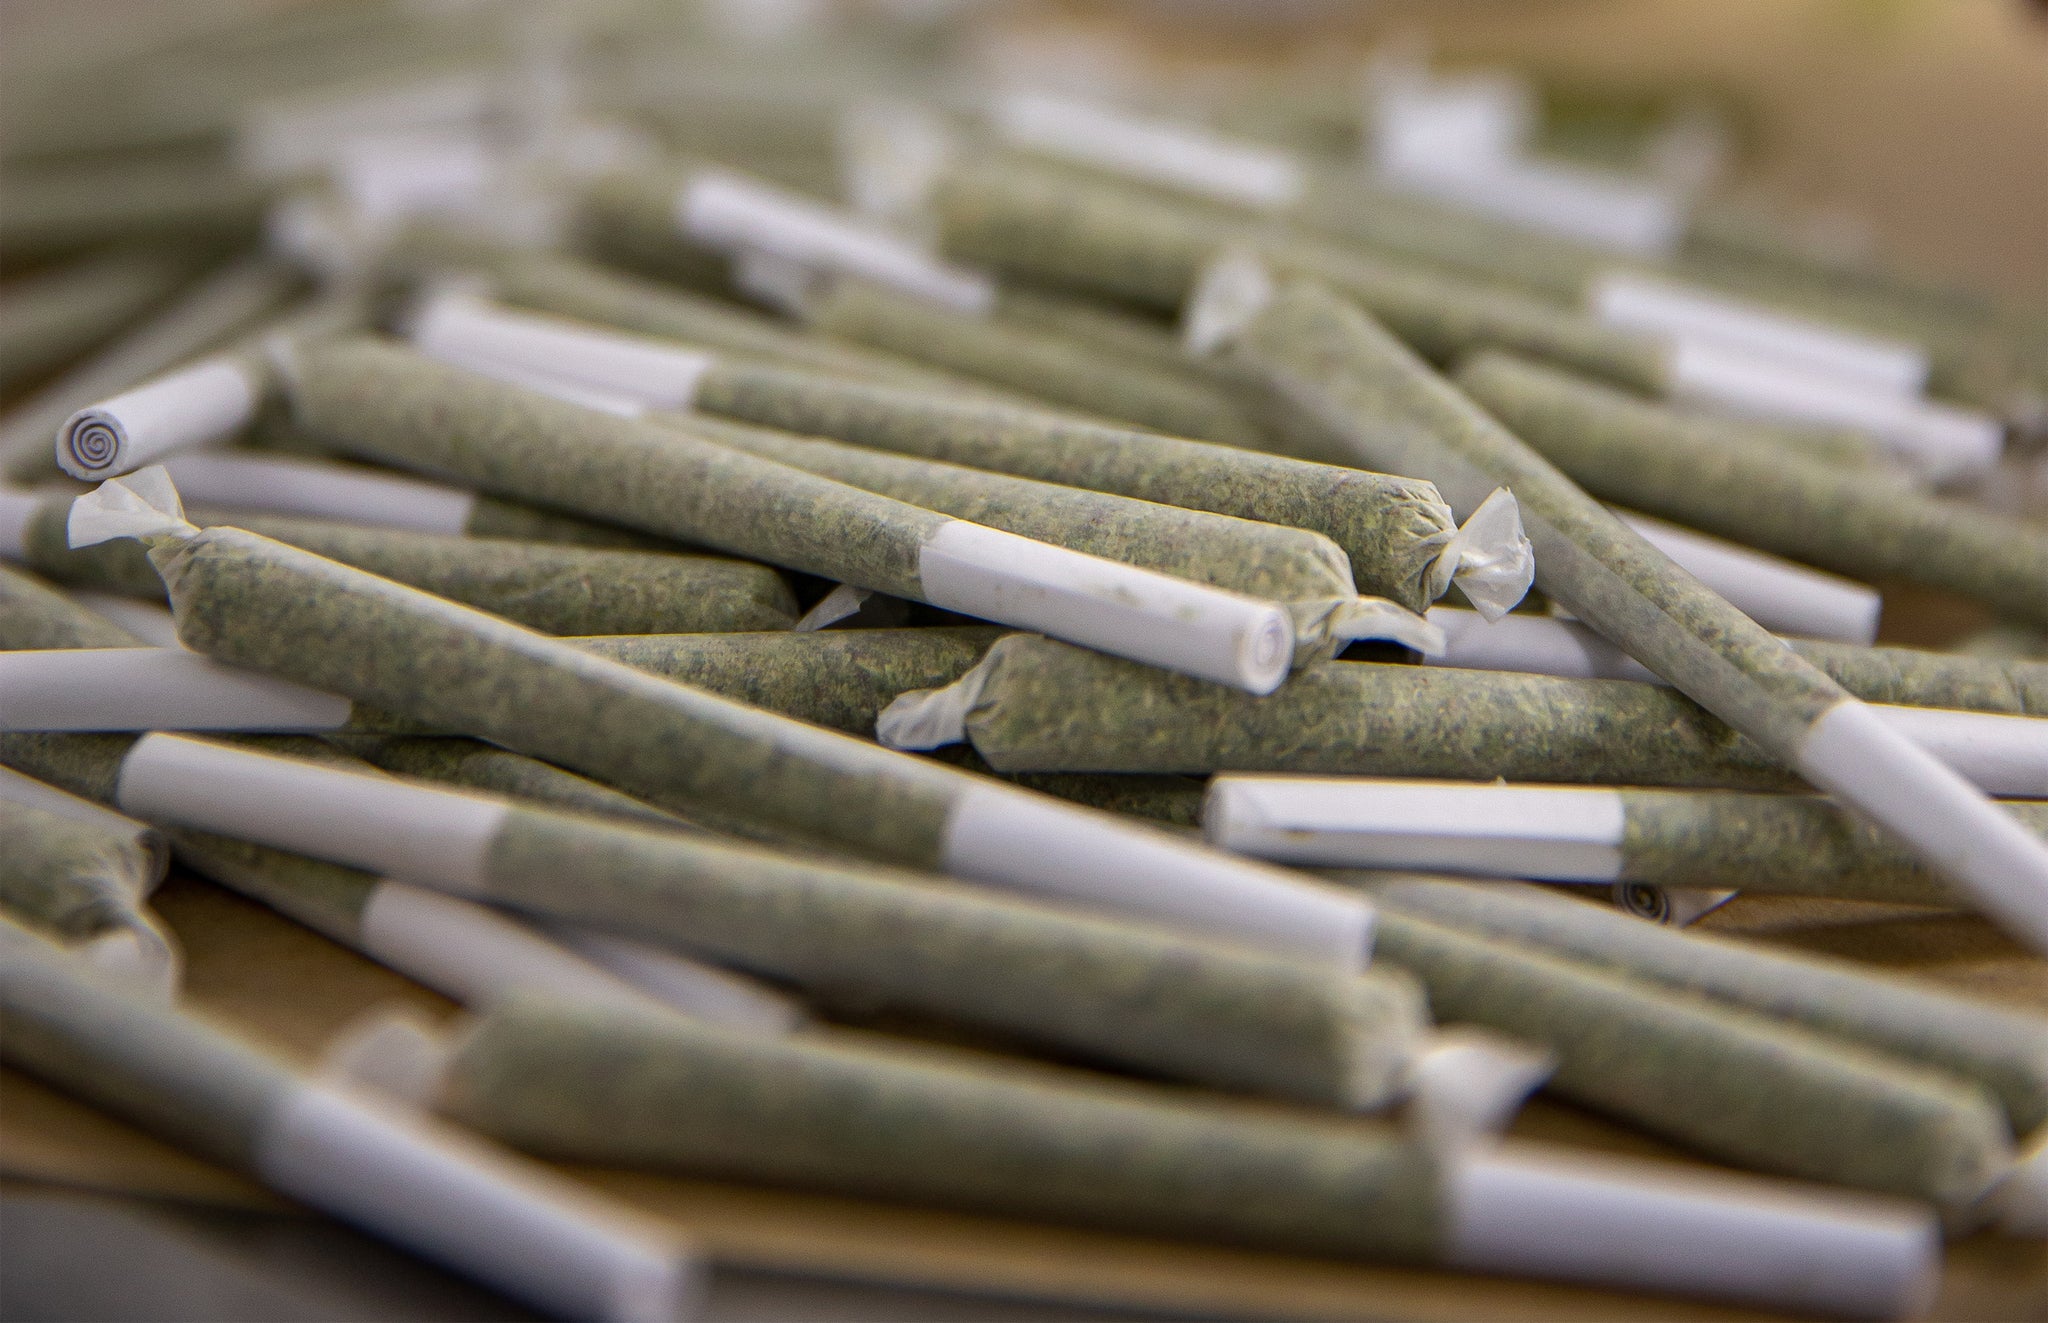 1g Pre-Roll Special! 4 for $20 or 10 for $40! High Testing Sativa & Indica!